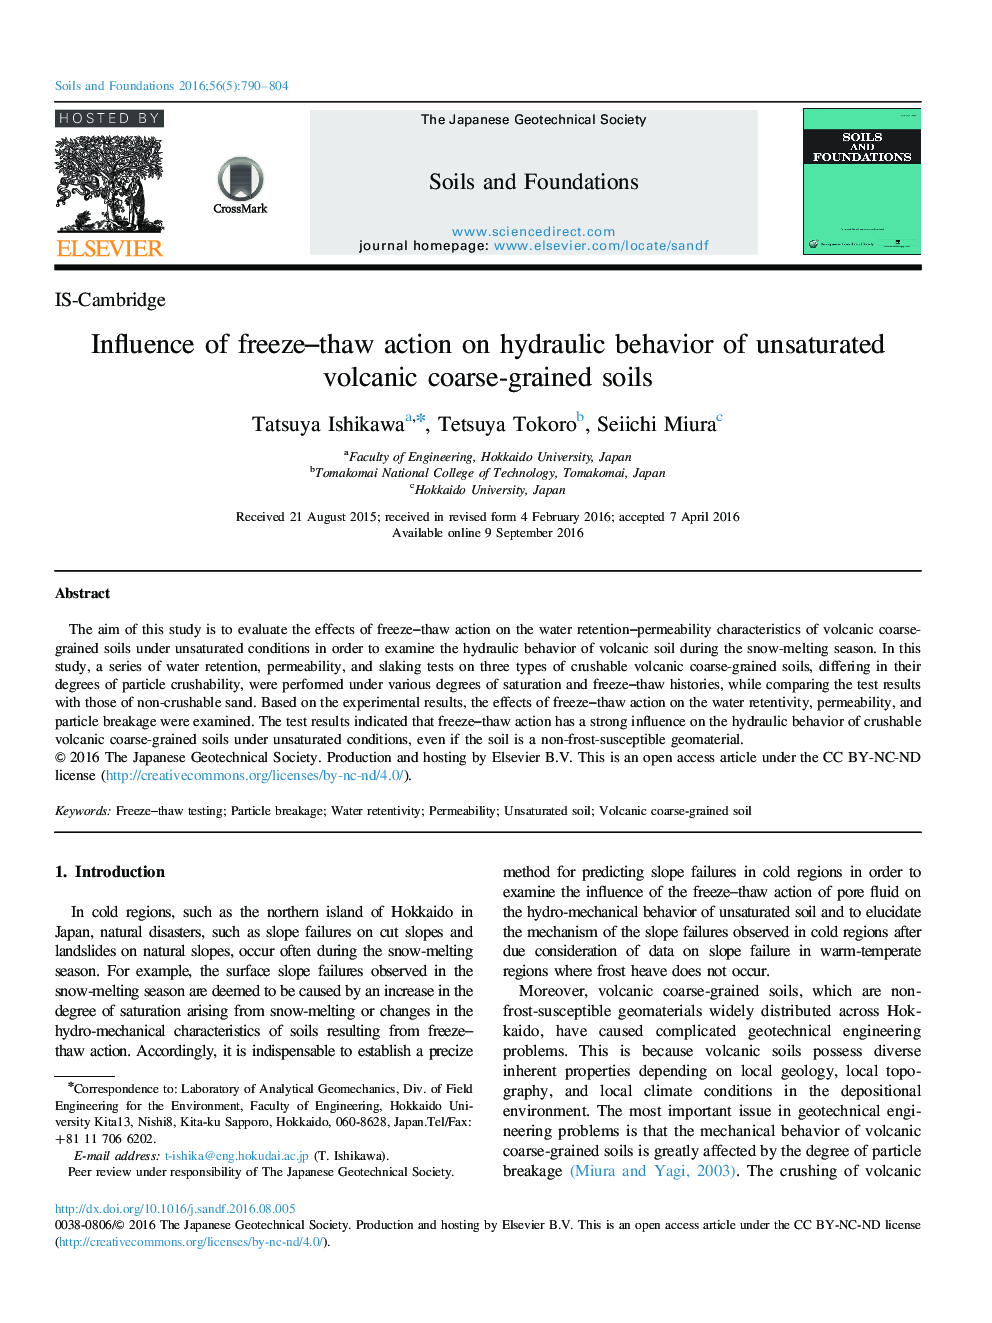 IS-CambridgeInfluence of freeze-thaw action on hydraulic behavior of unsaturated volcanic coarse-grained soils